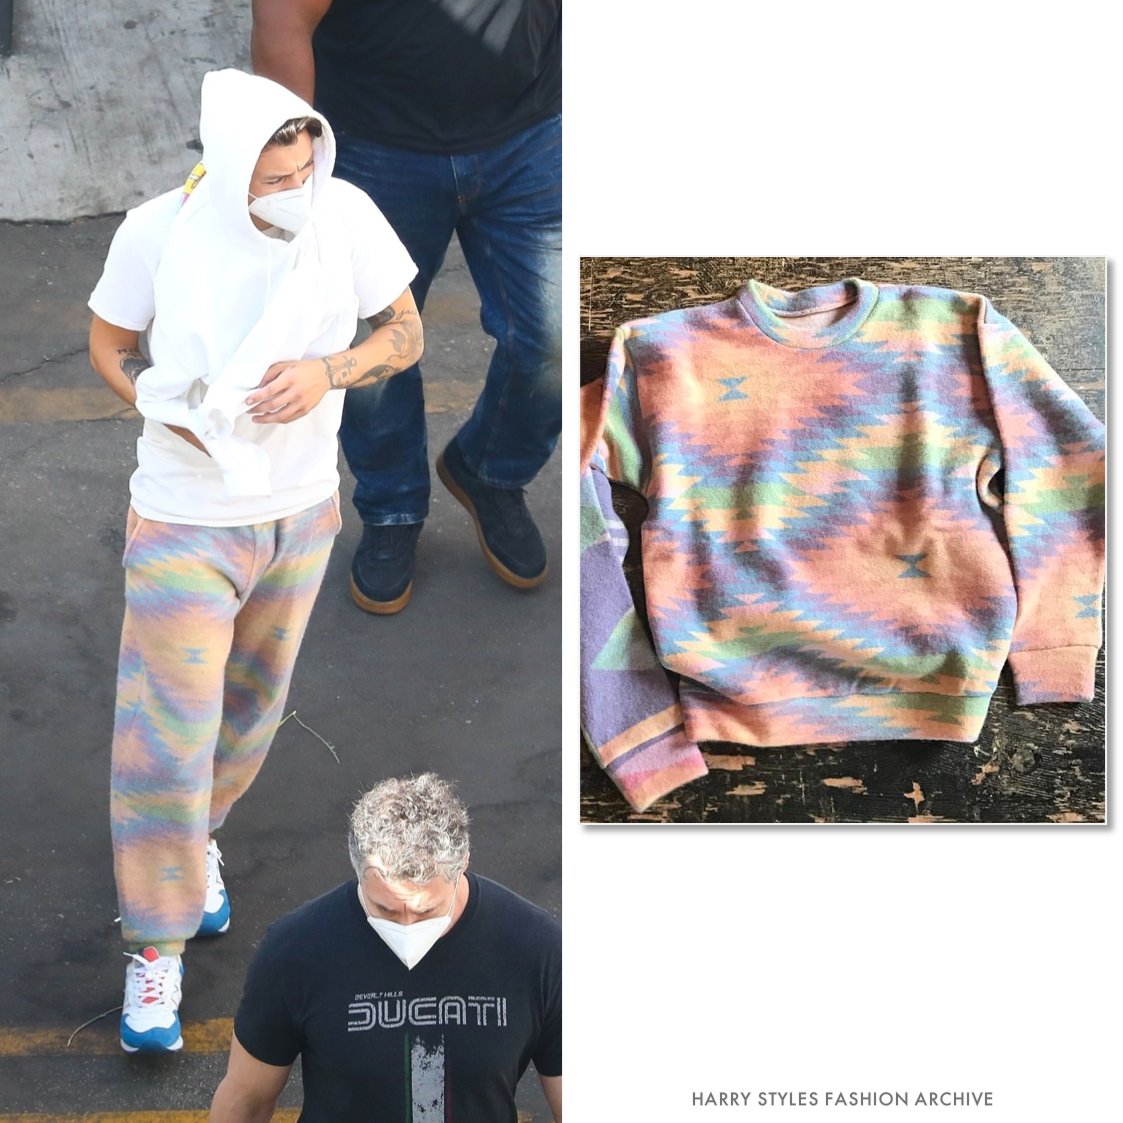 Harry Styles Fashion Archive on X: Harry wore a pair of rainbow sweatpants  from The Elder Statesman, probably purchased back in fall 2017. The  sweatpants were likely only sold in stores. We'll